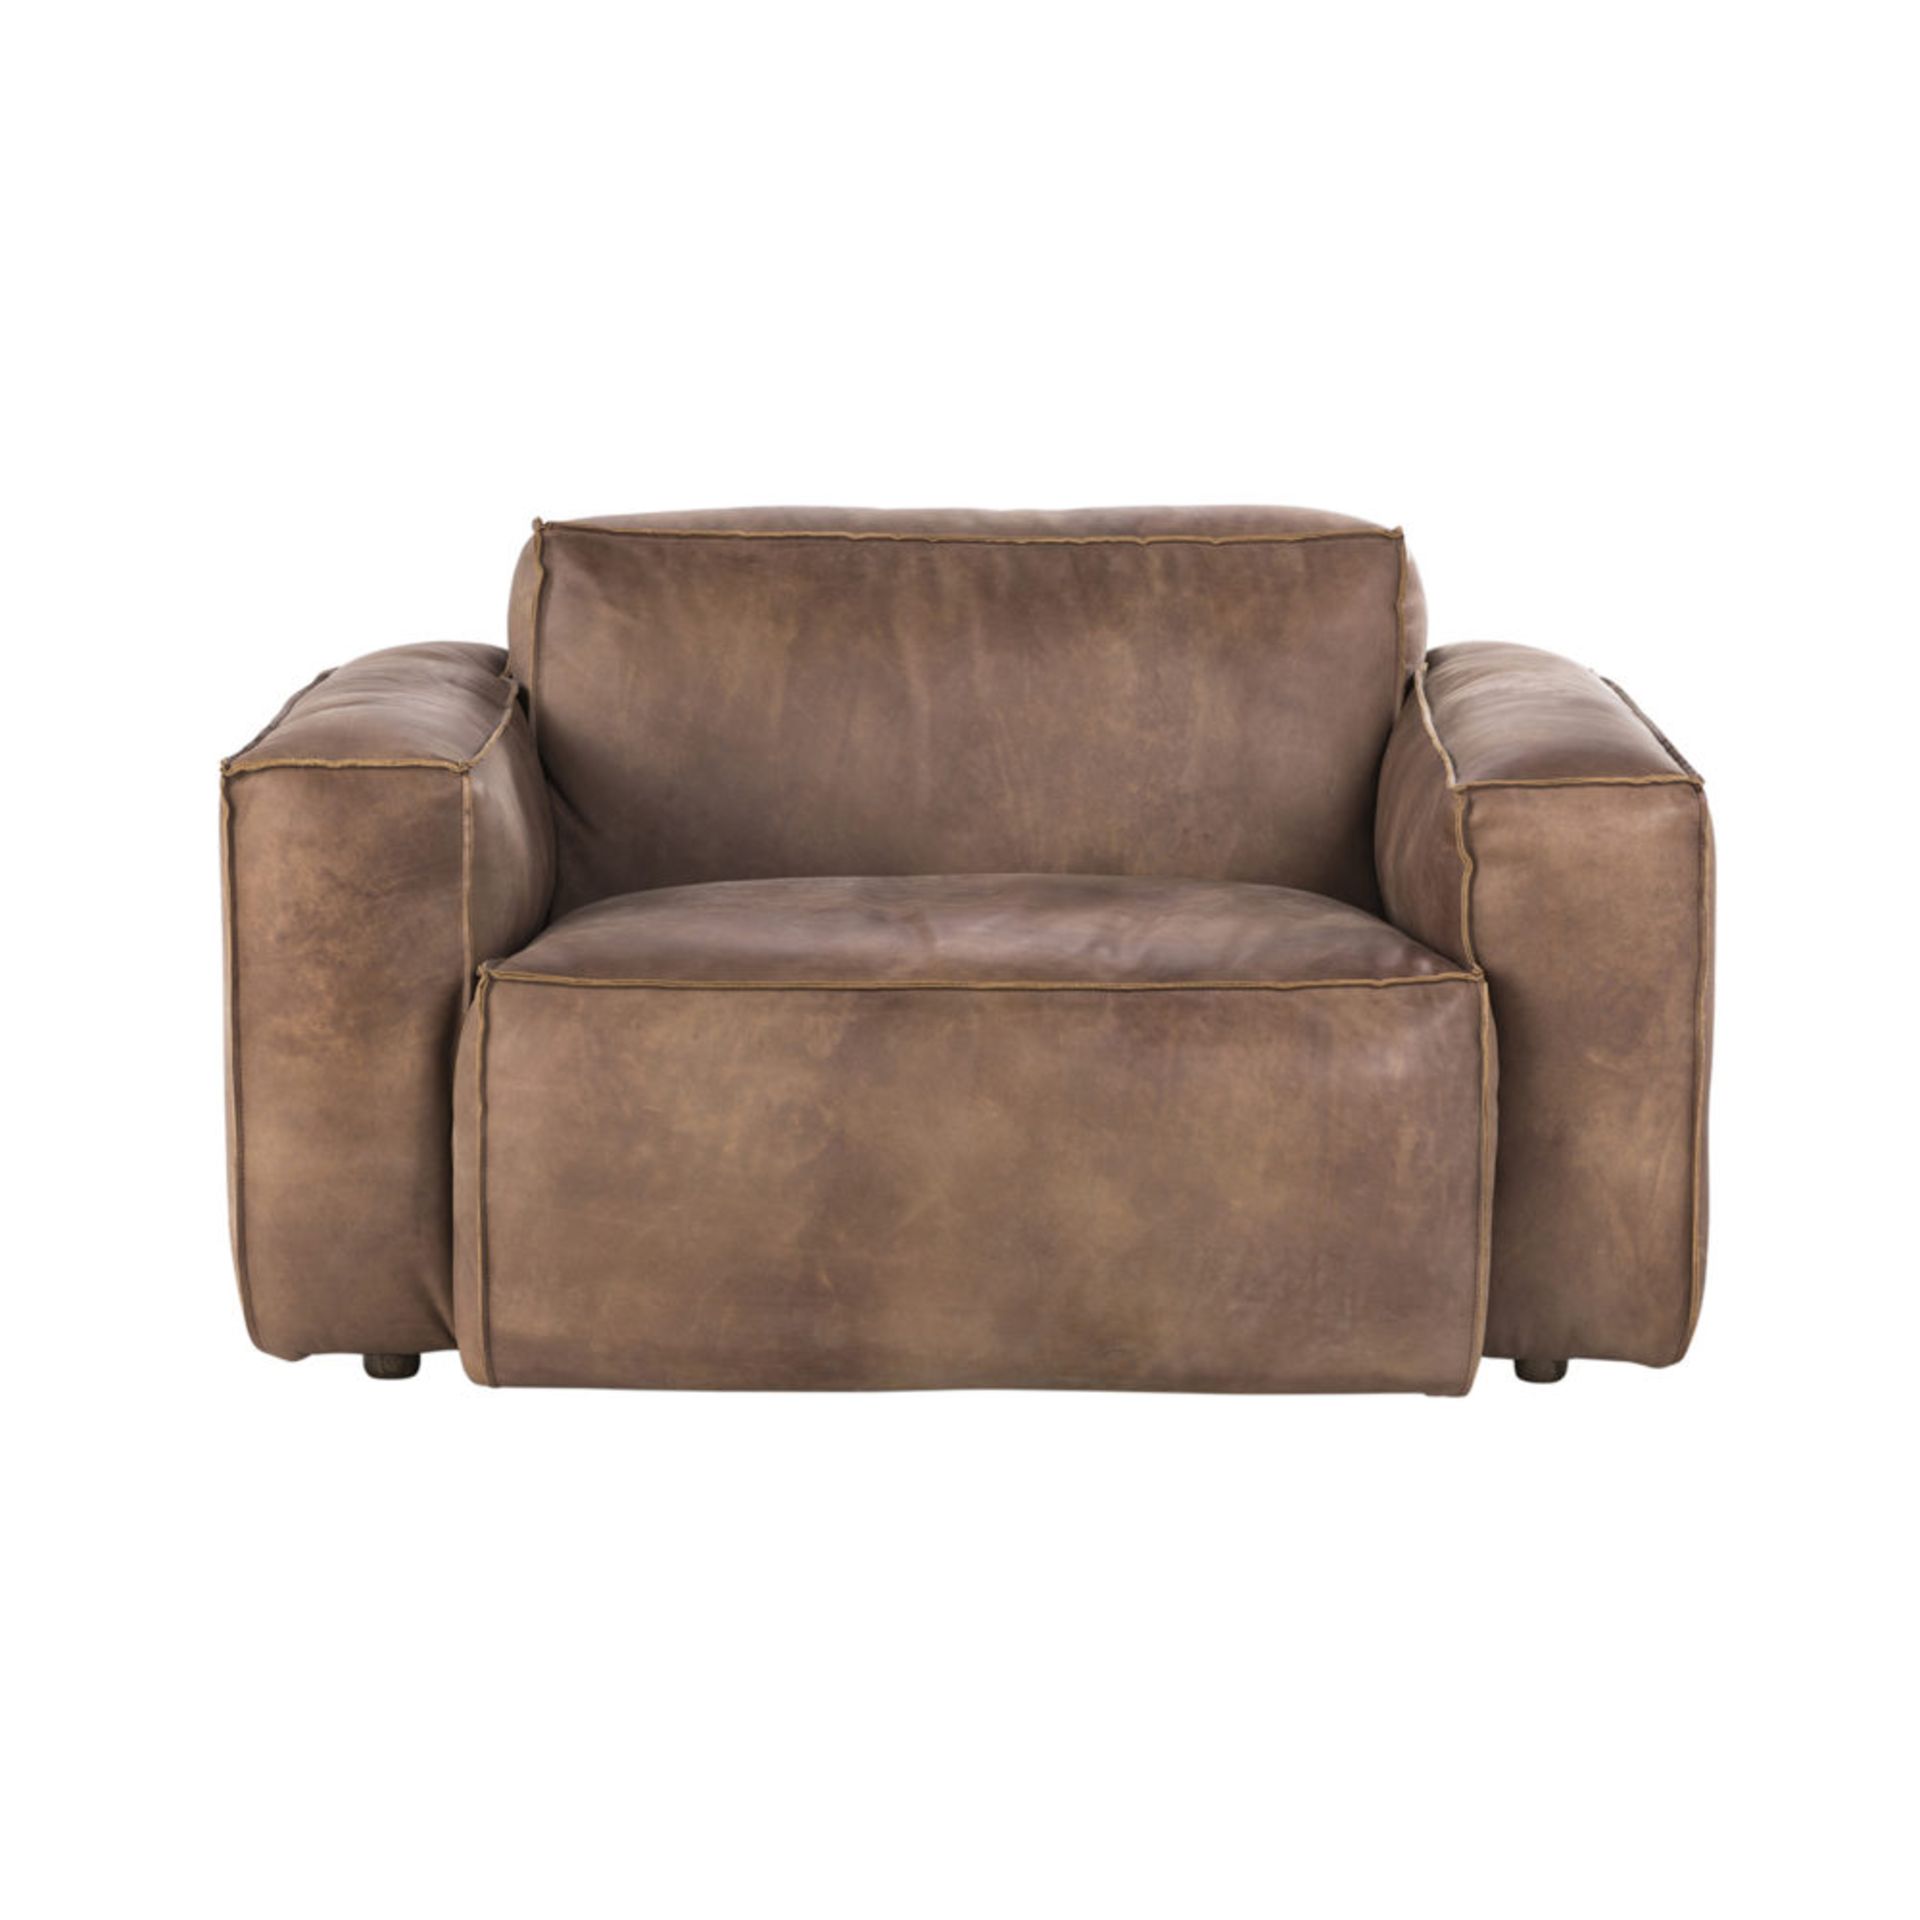 Buddy Medium Sofa – 1 Seater Sioux Tobacco Leather The Buddy Sofa Projects A Strong Presence - Image 2 of 2